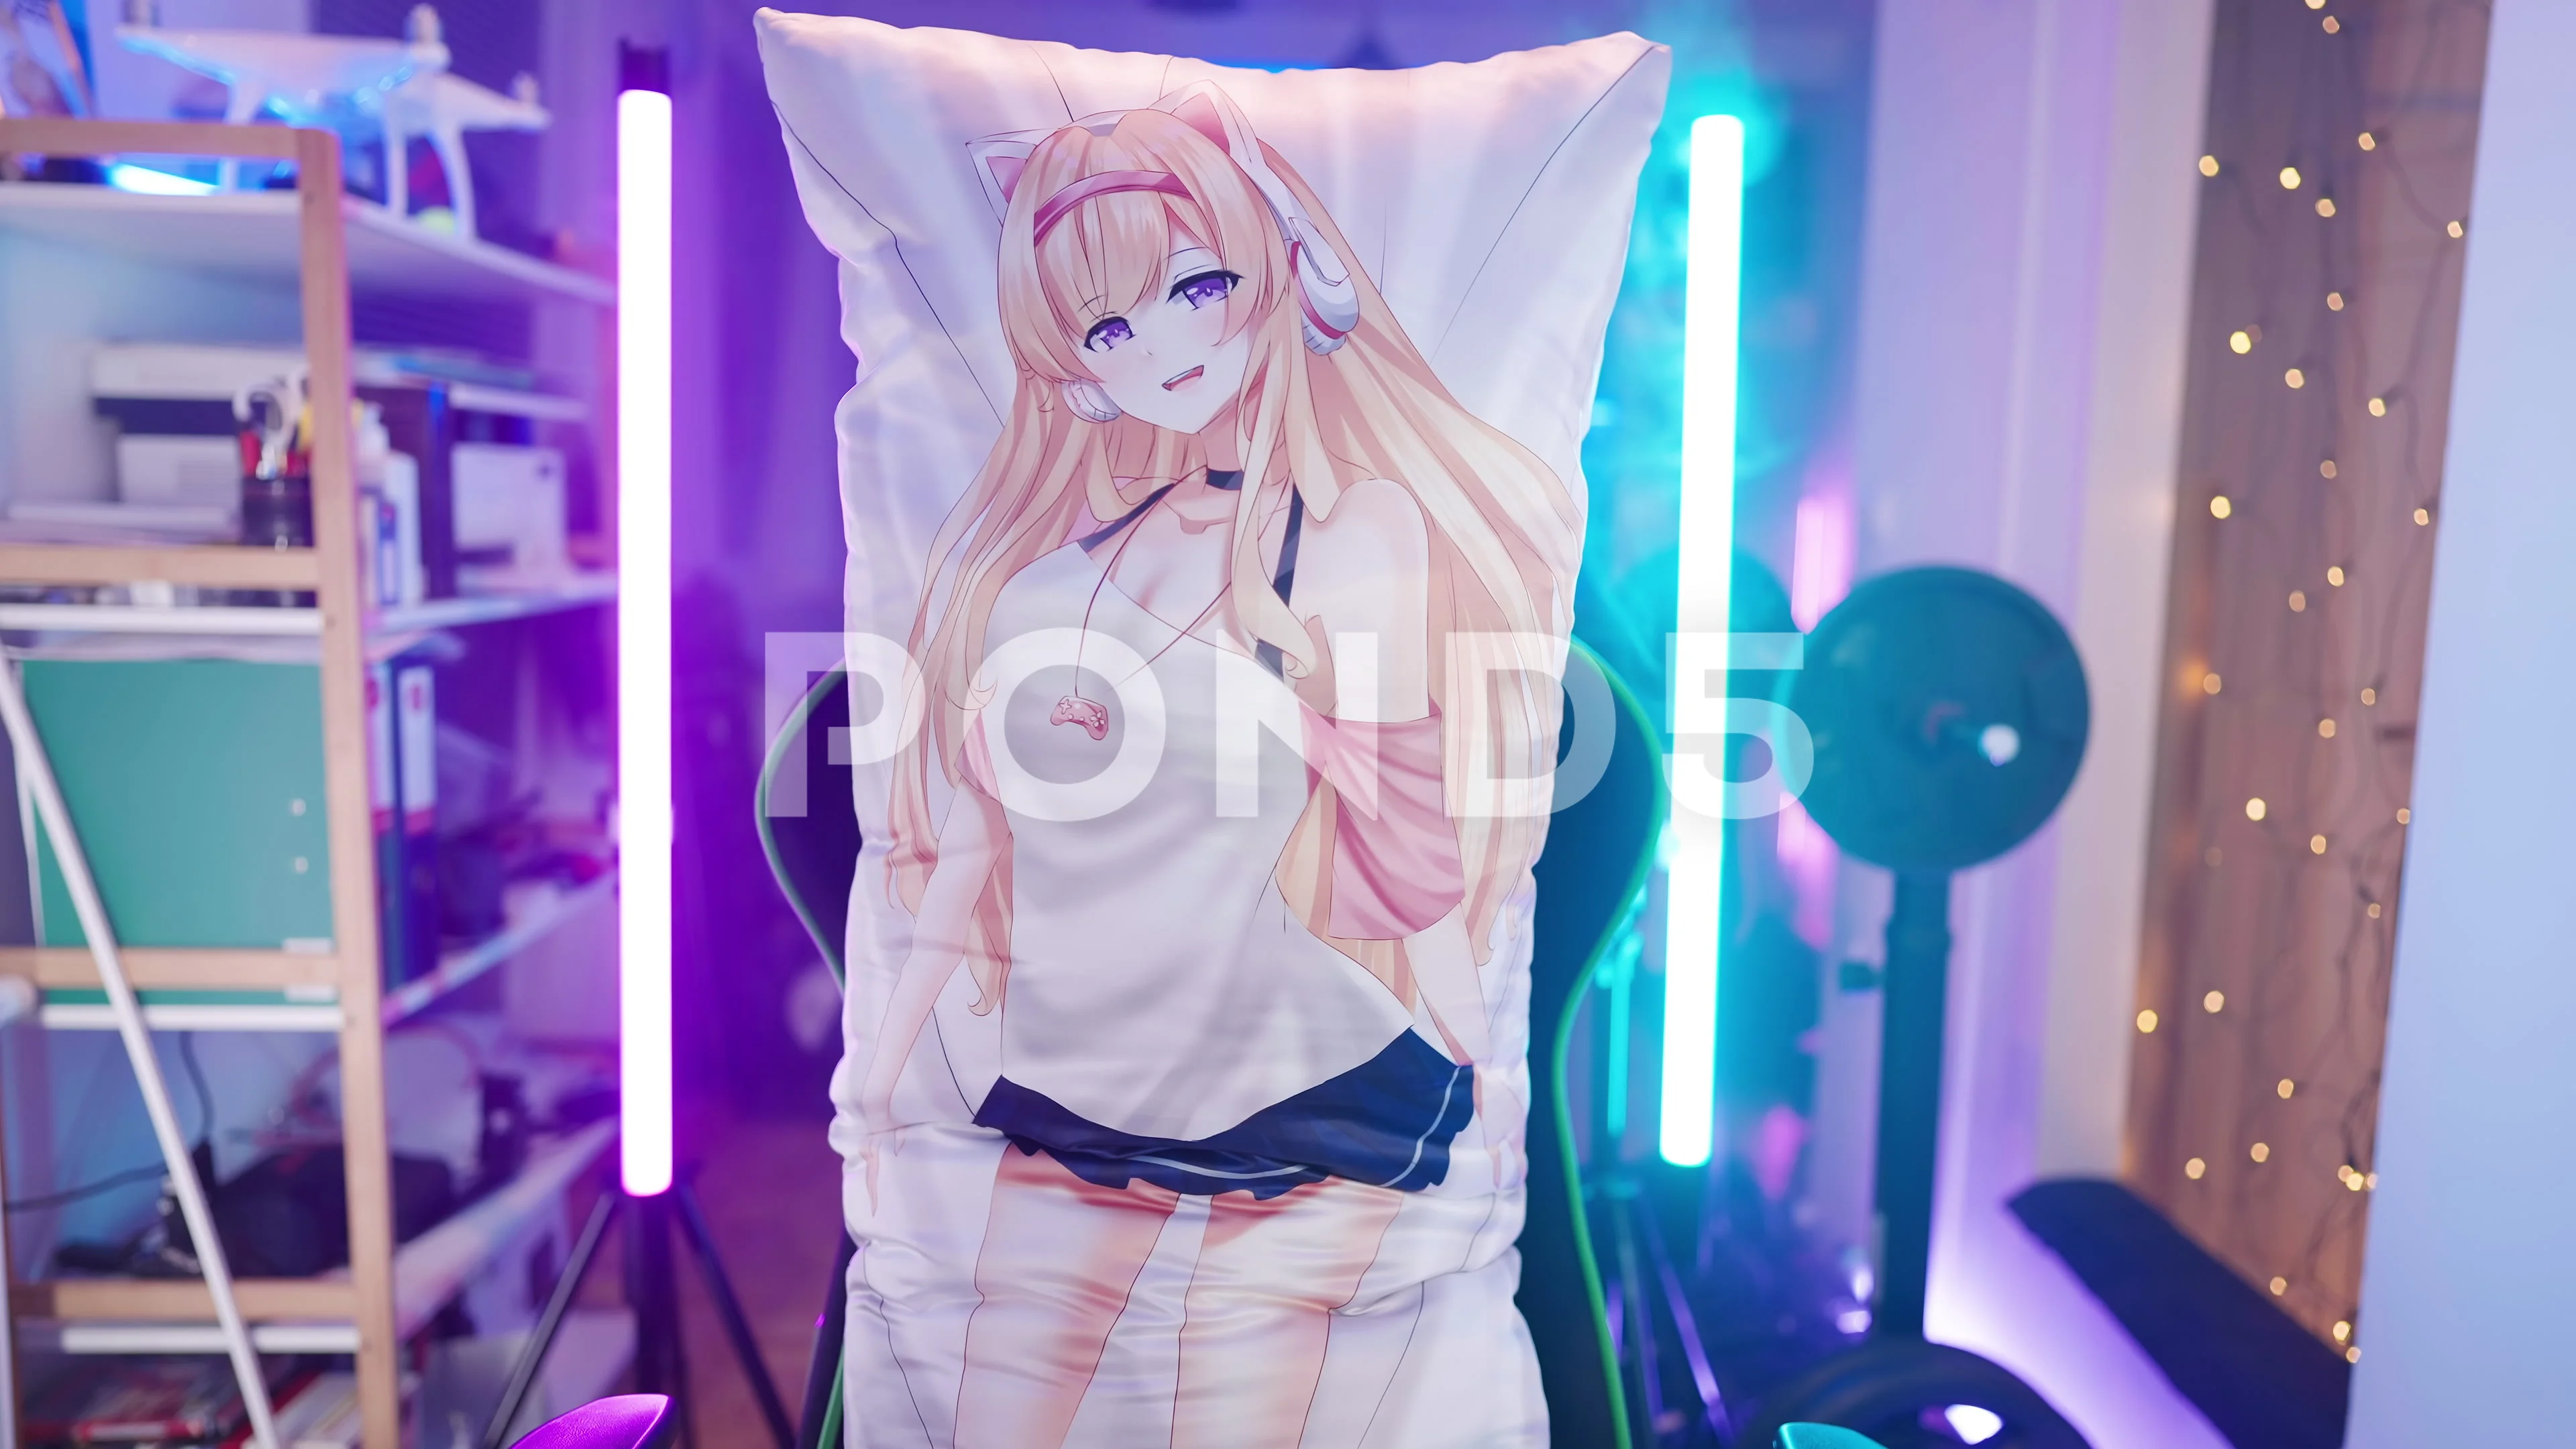 Cute anime girl body pillow on gaming ch, Stock Video